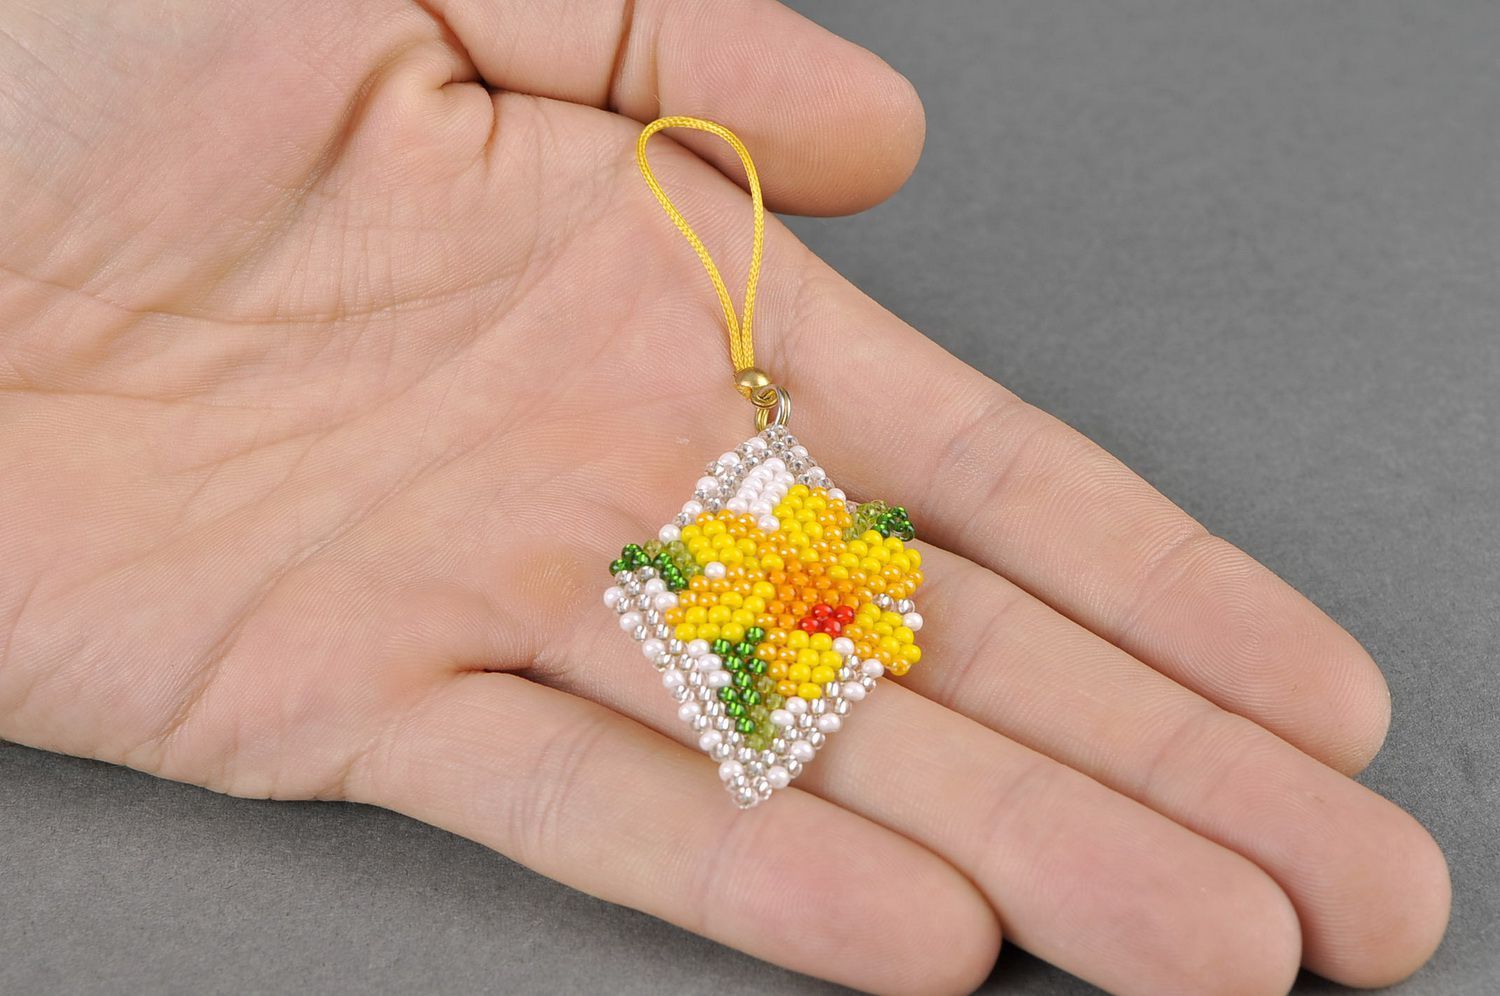 Beaded thumbs Narcissus photo 5